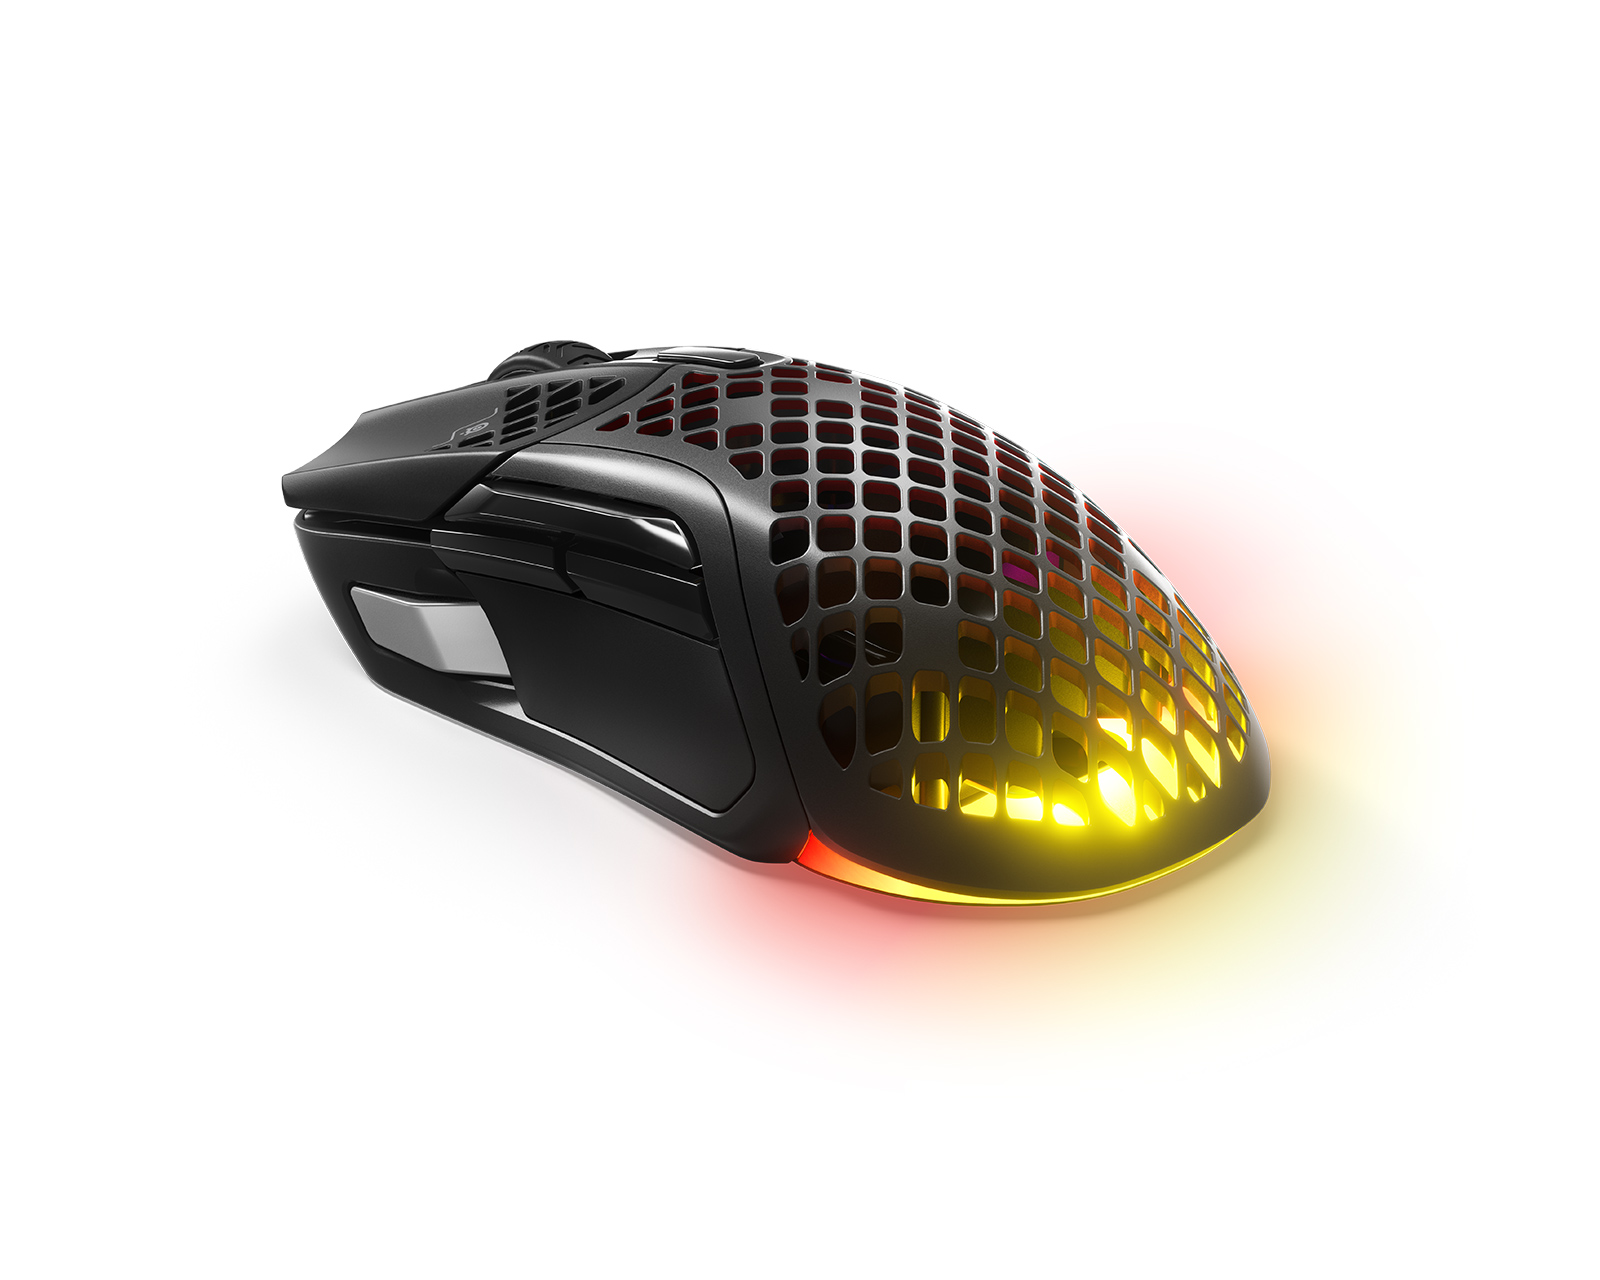 SteelSeries Aerox 5 Wireless Gaming Mouse - Black 